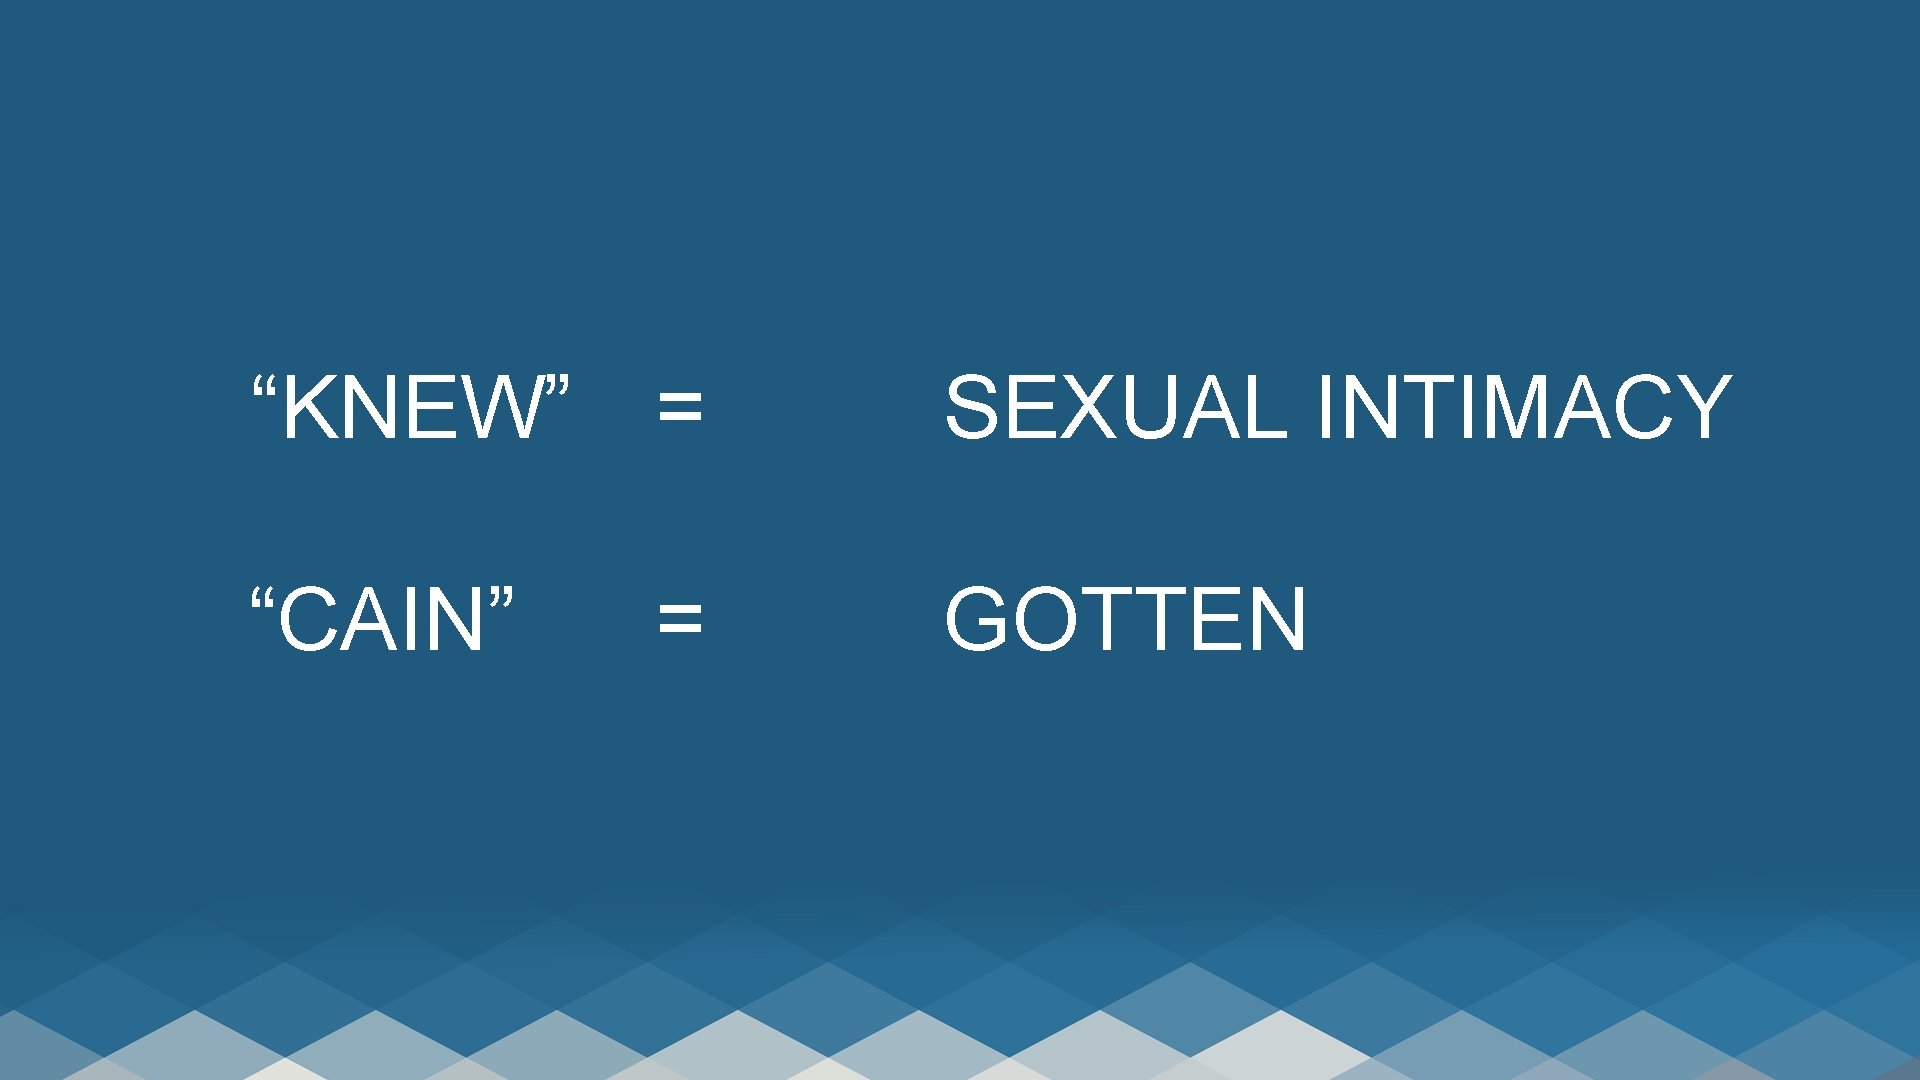  “KNEW” = “CAIN” = SEXUAL INTIMACY GOTTEN 